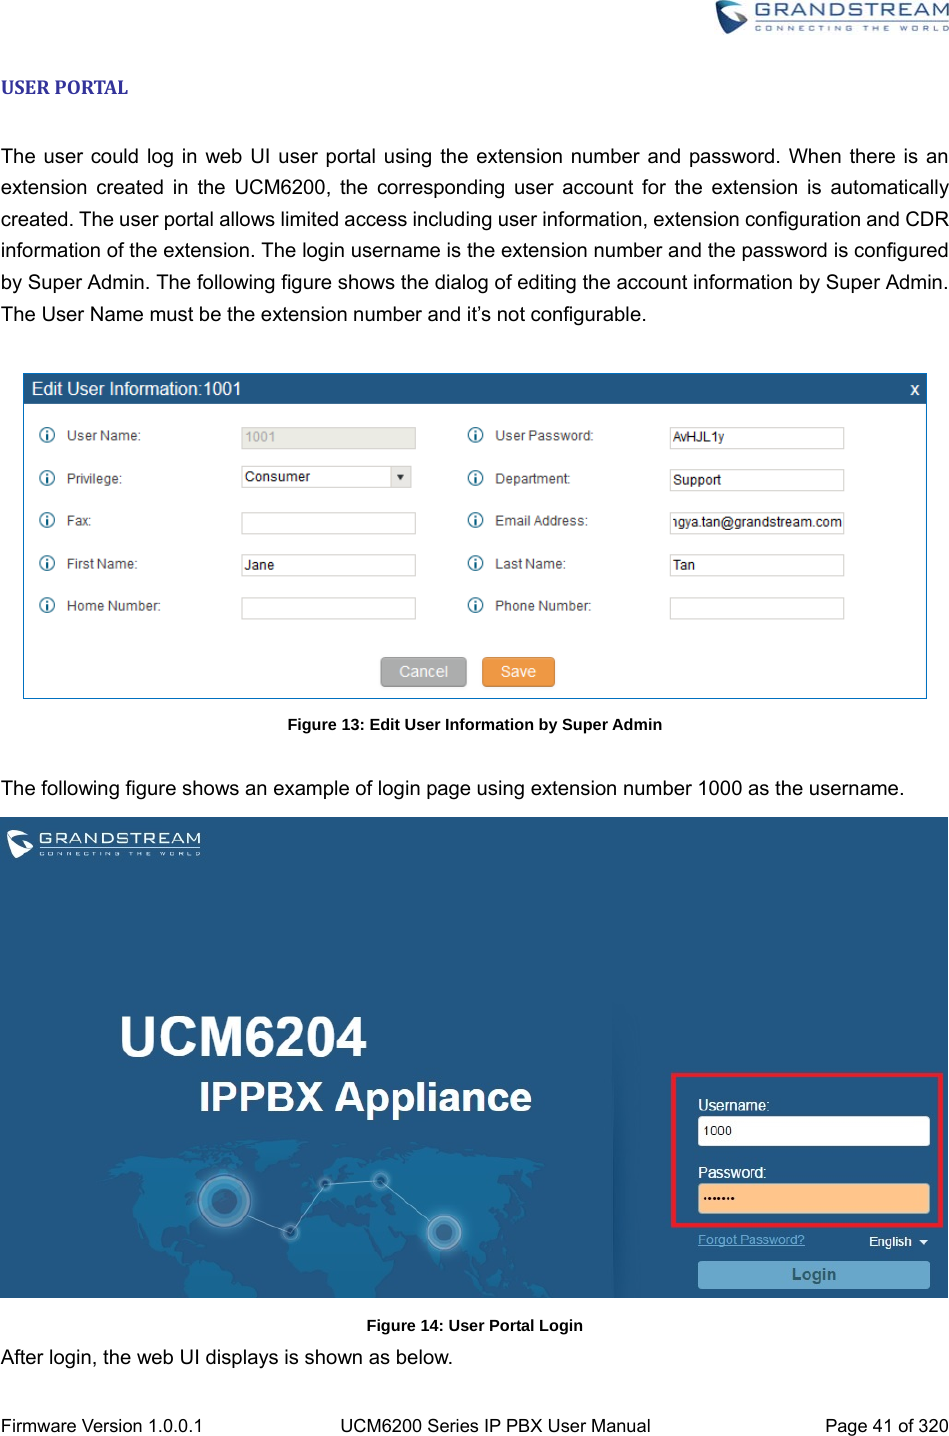  Firmware Version 1.0.0.1  UCM6200 Series IP PBX User Manual  Page 41 of 320 USERPORTAL The user could log in web UI user portal using the extension number and password. When there is an extension created in the UCM6200, the corresponding user account for the extension is automatically created. The user portal allows limited access including user information, extension configuration and CDR information of the extension. The login username is the extension number and the password is configured by Super Admin. The following figure shows the dialog of editing the account information by Super Admin. The User Name must be the extension number and it’s not configurable.   Figure 13: Edit User Information by Super Admin  The following figure shows an example of login page using extension number 1000 as the username.  Figure 14: User Portal Login After login, the web UI displays is shown as below. 